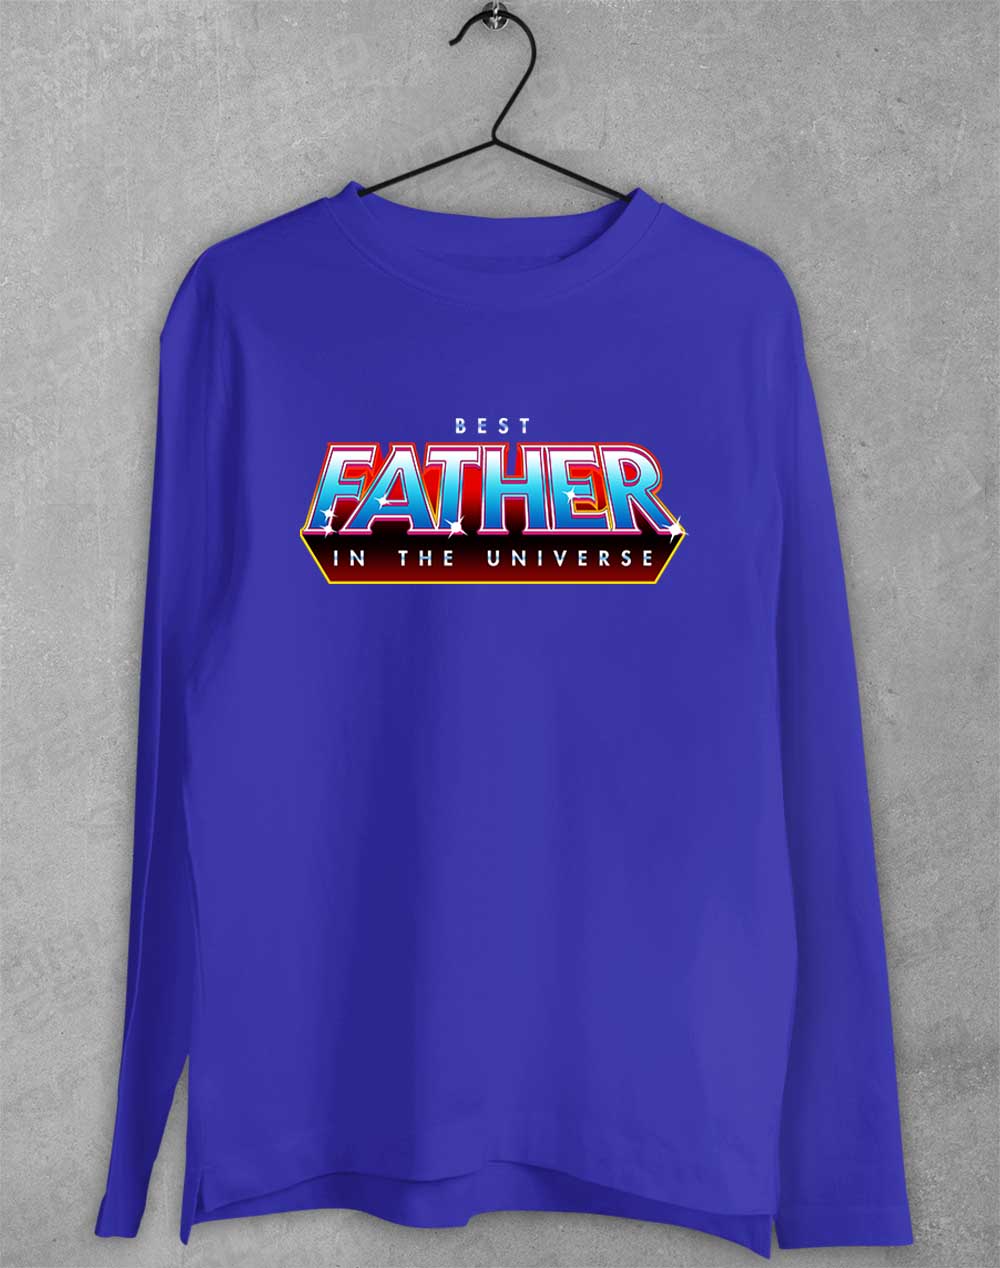 Royal - Best Father in the Universe Long Sleeve T-Shirt